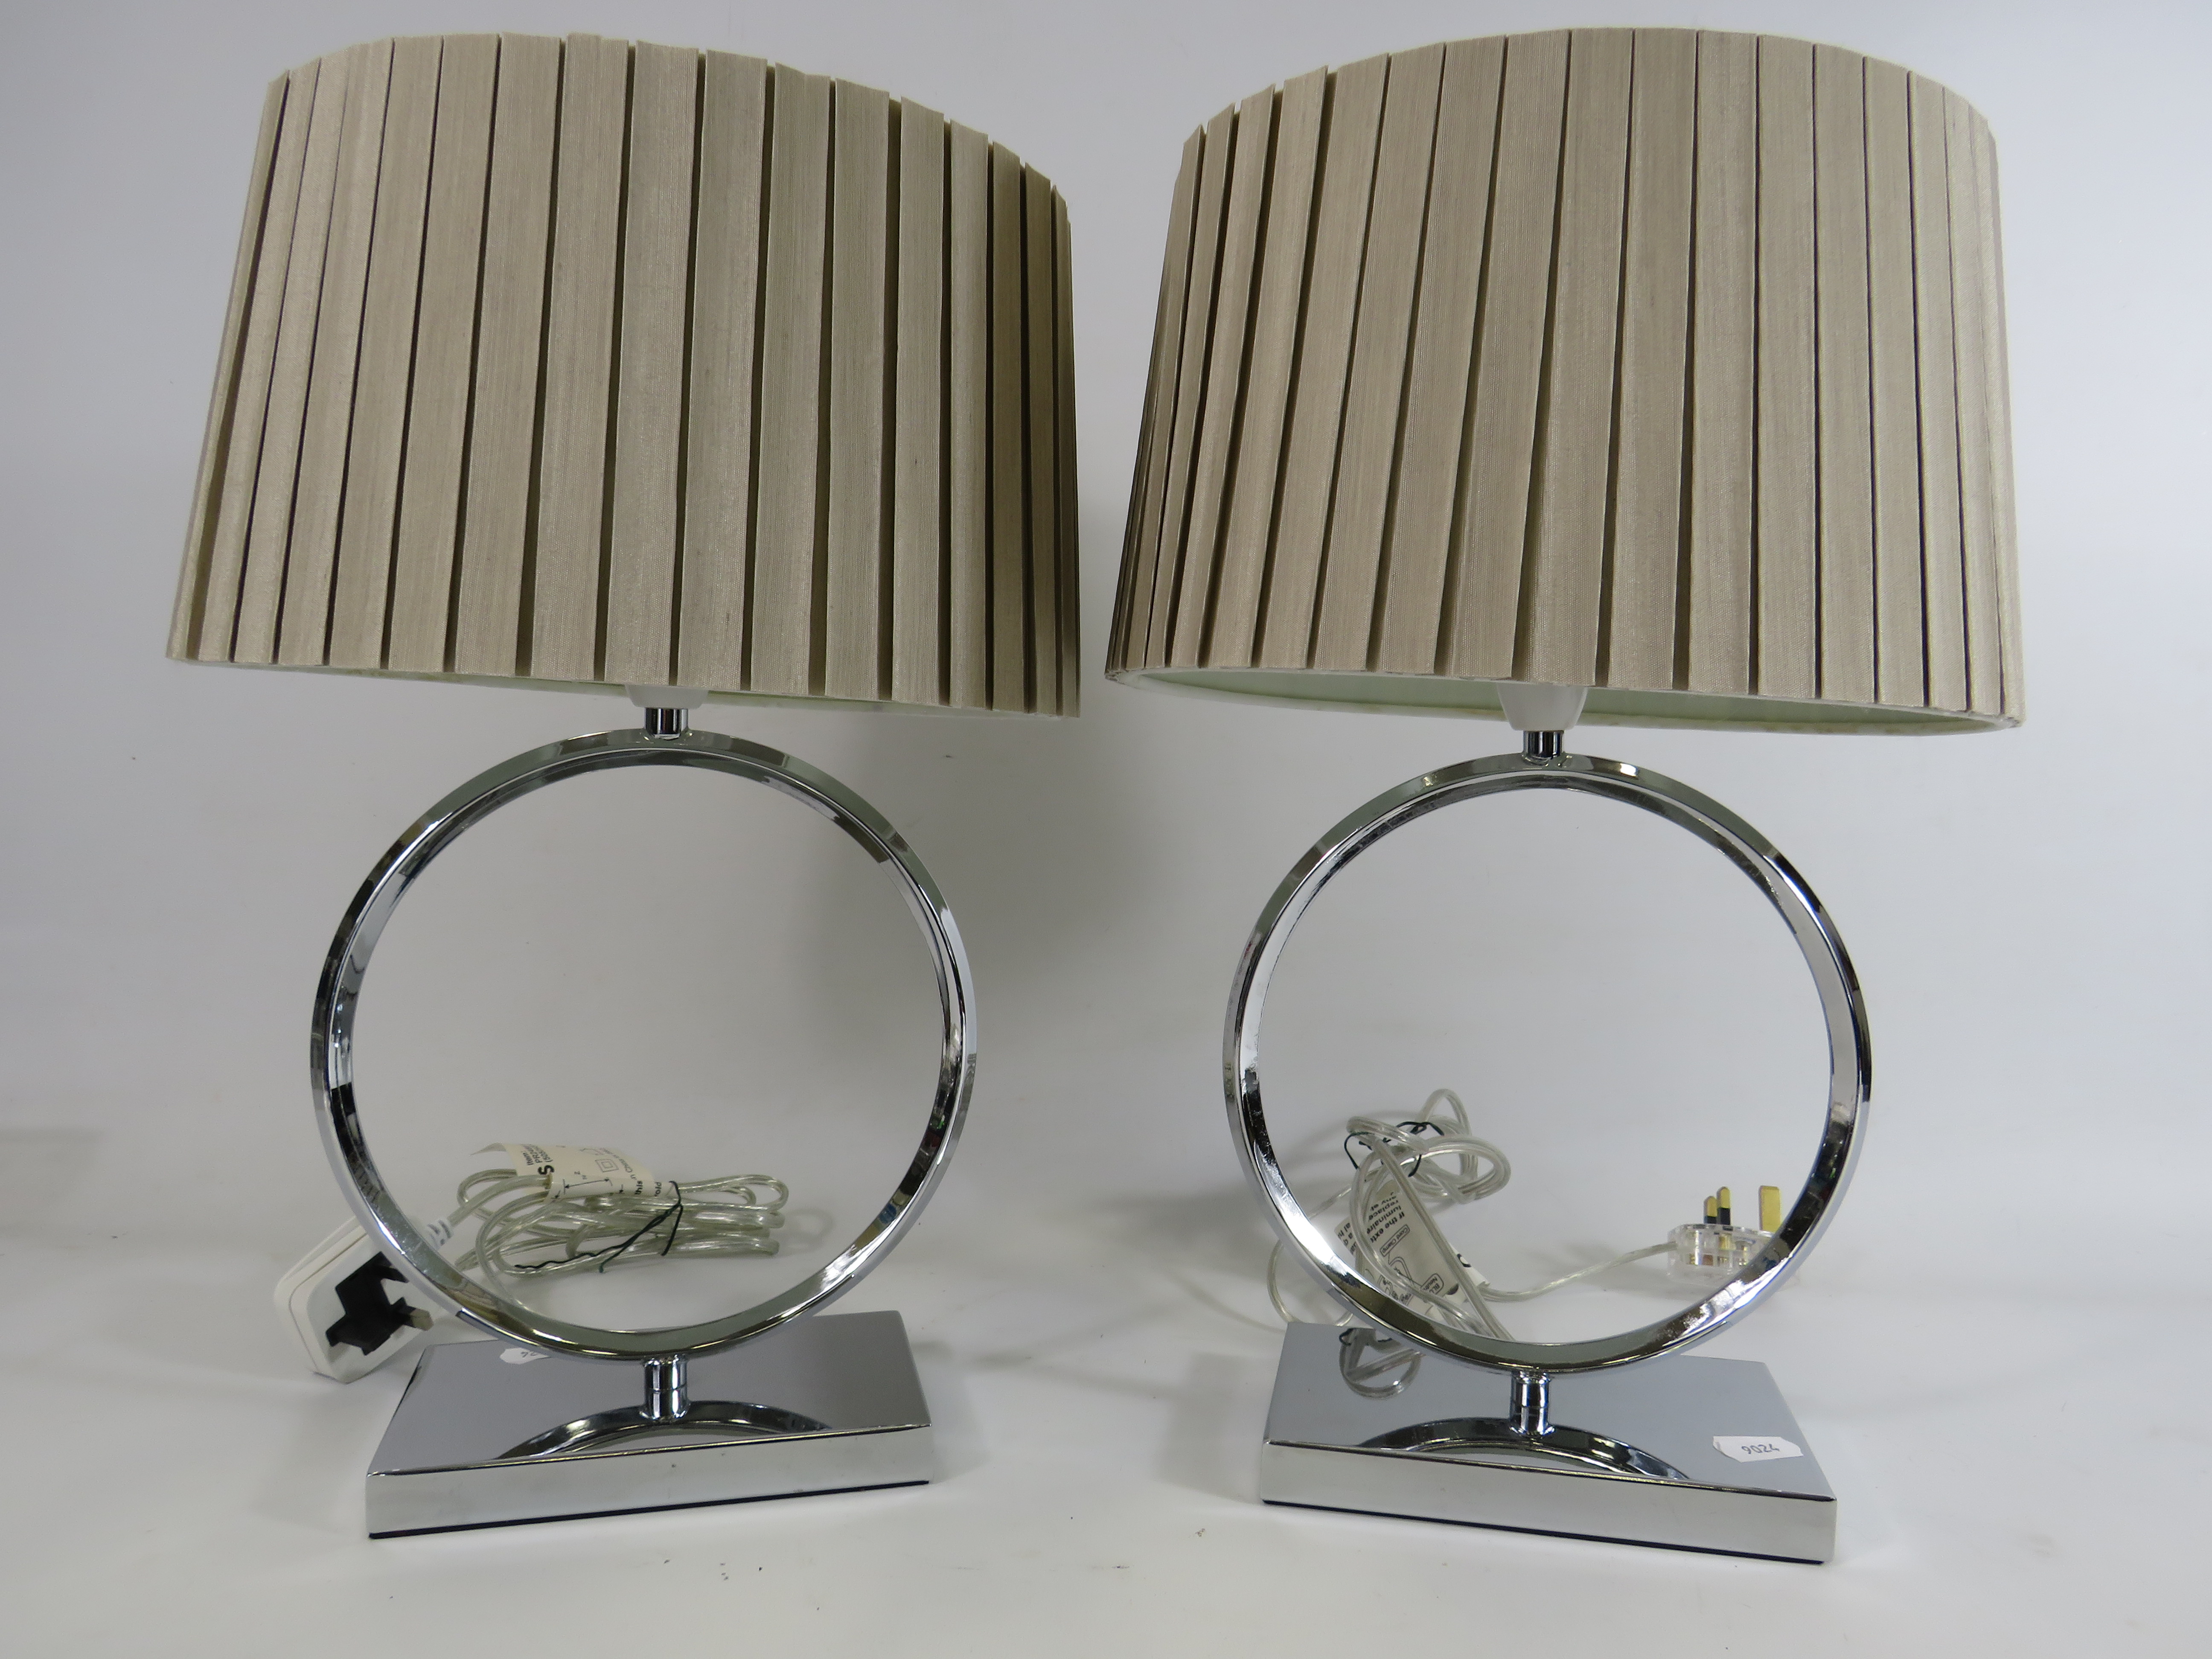 2 Modern chrome bases table lamps with shades, 16.5" to top of shade.